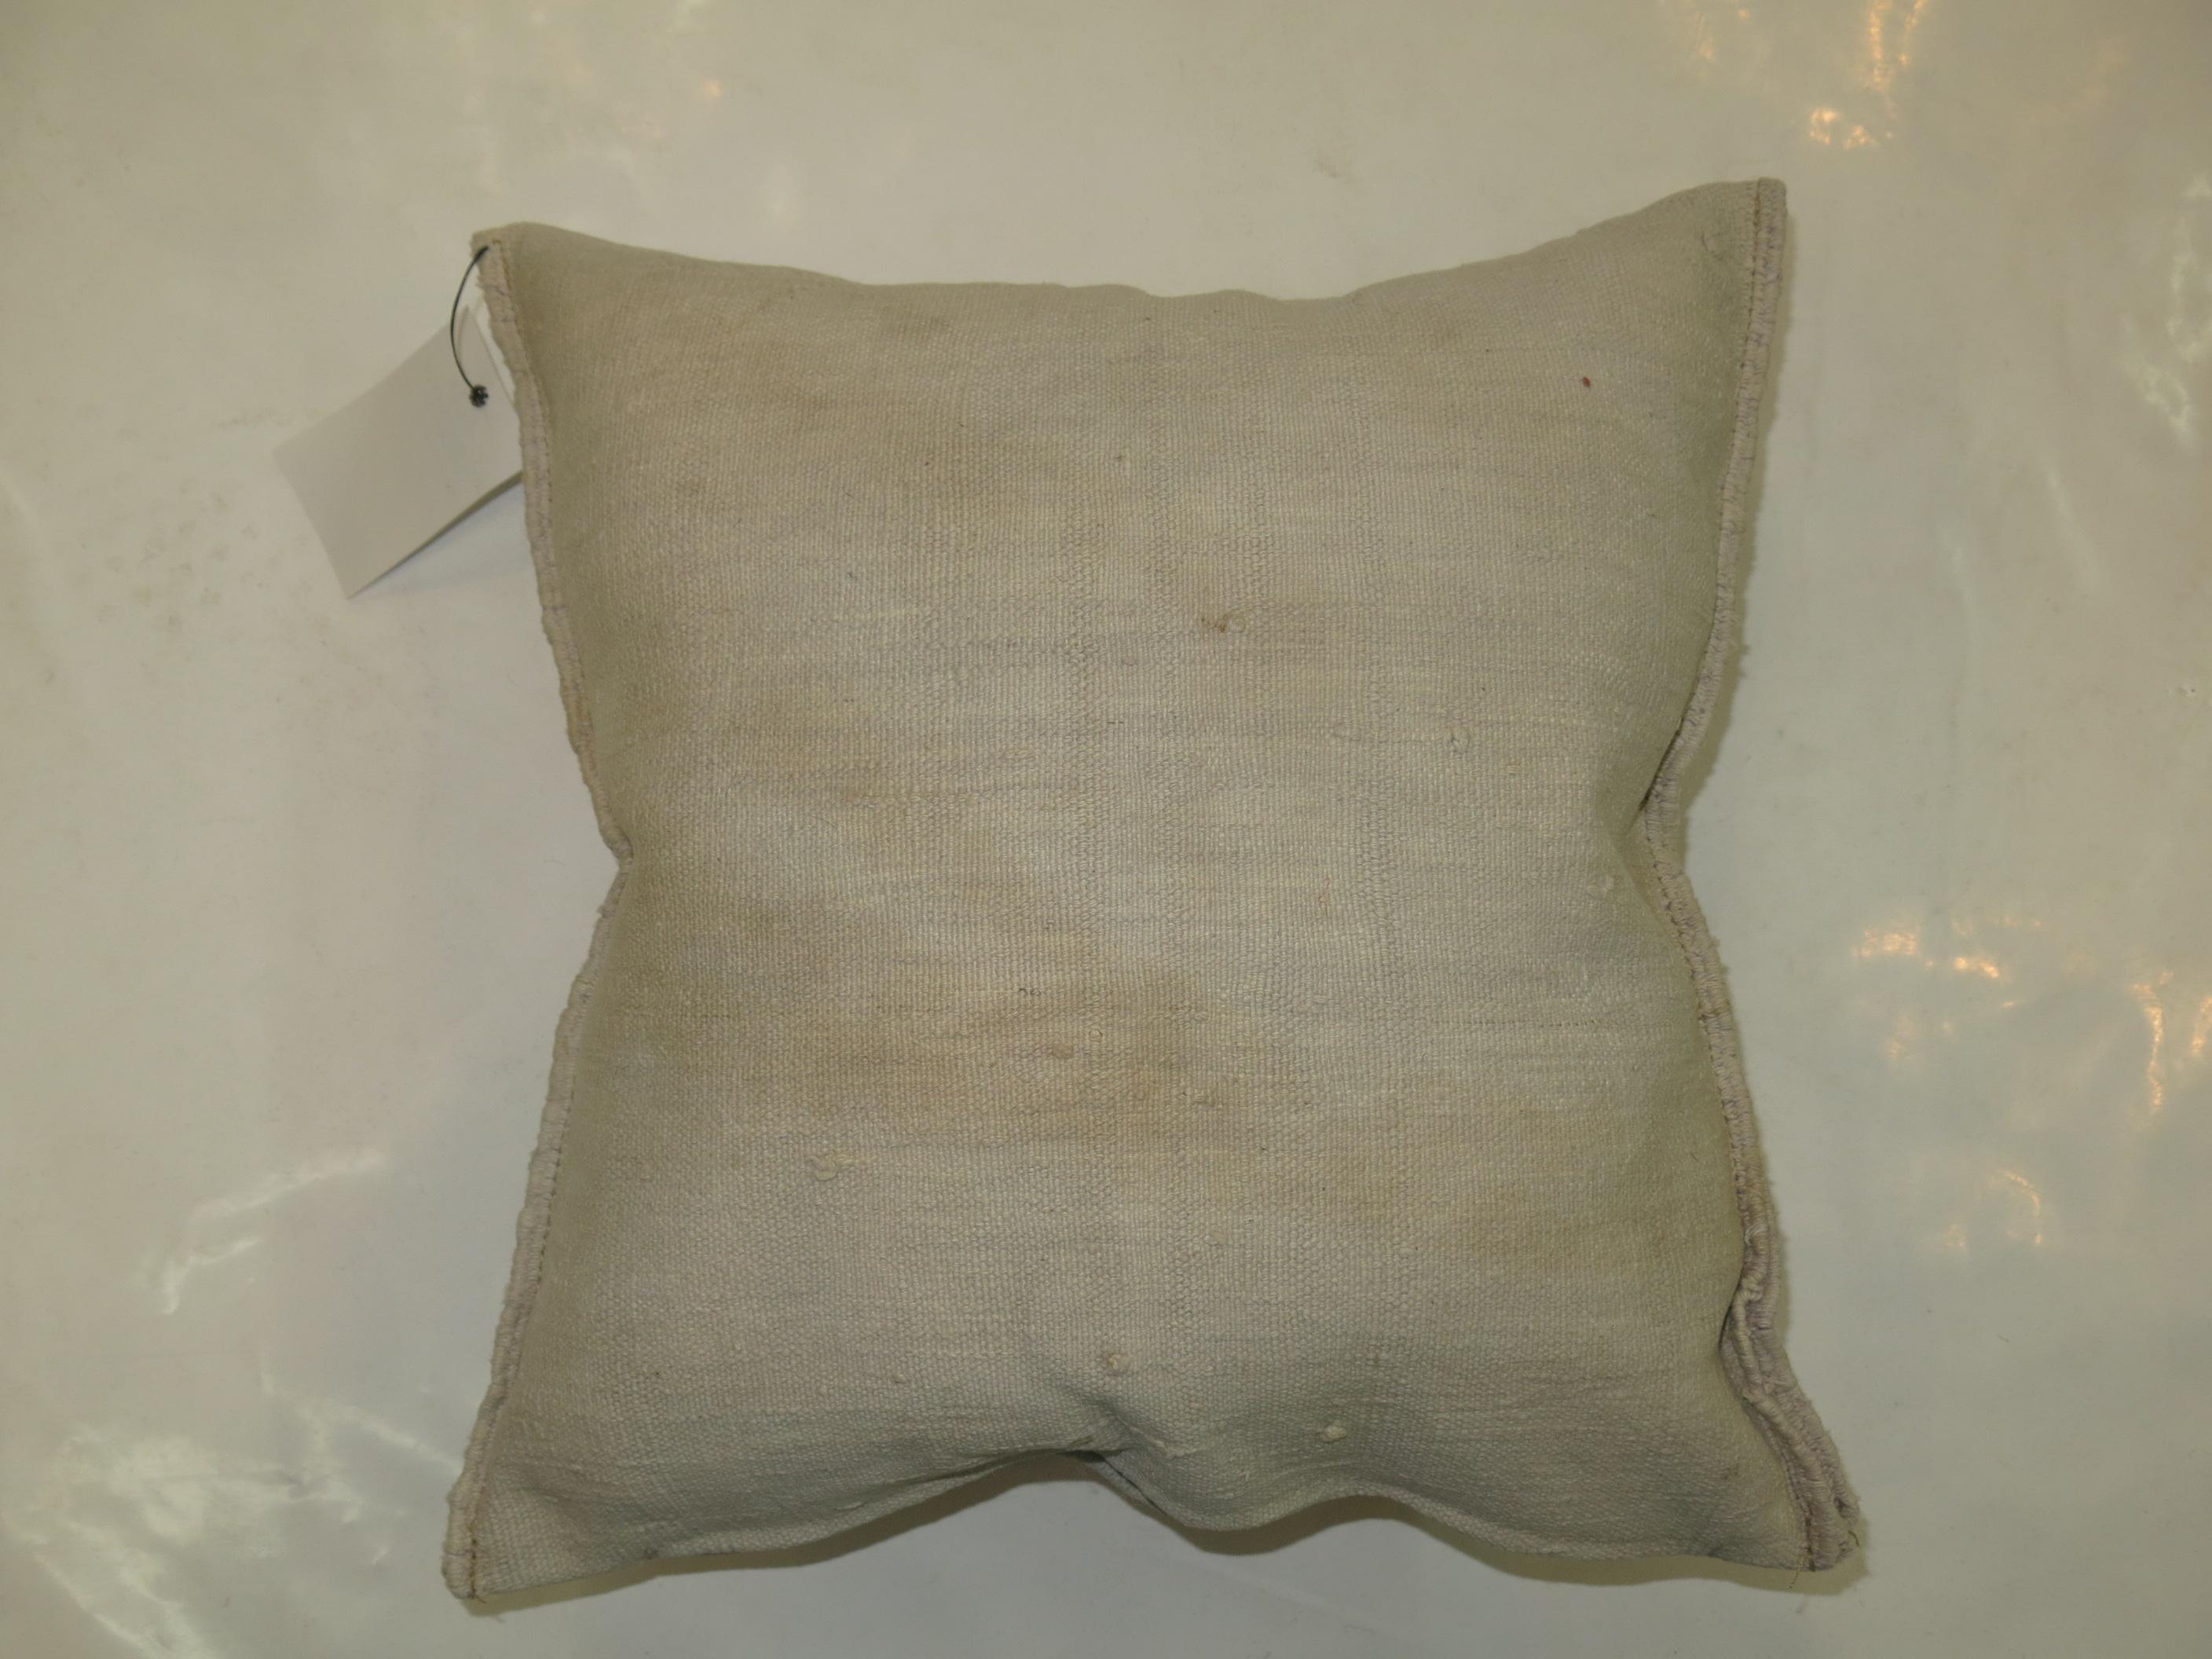 Mini size pillow made from a border of a tribal Turkish Anatolian rug from the 20th century.

Size: 16